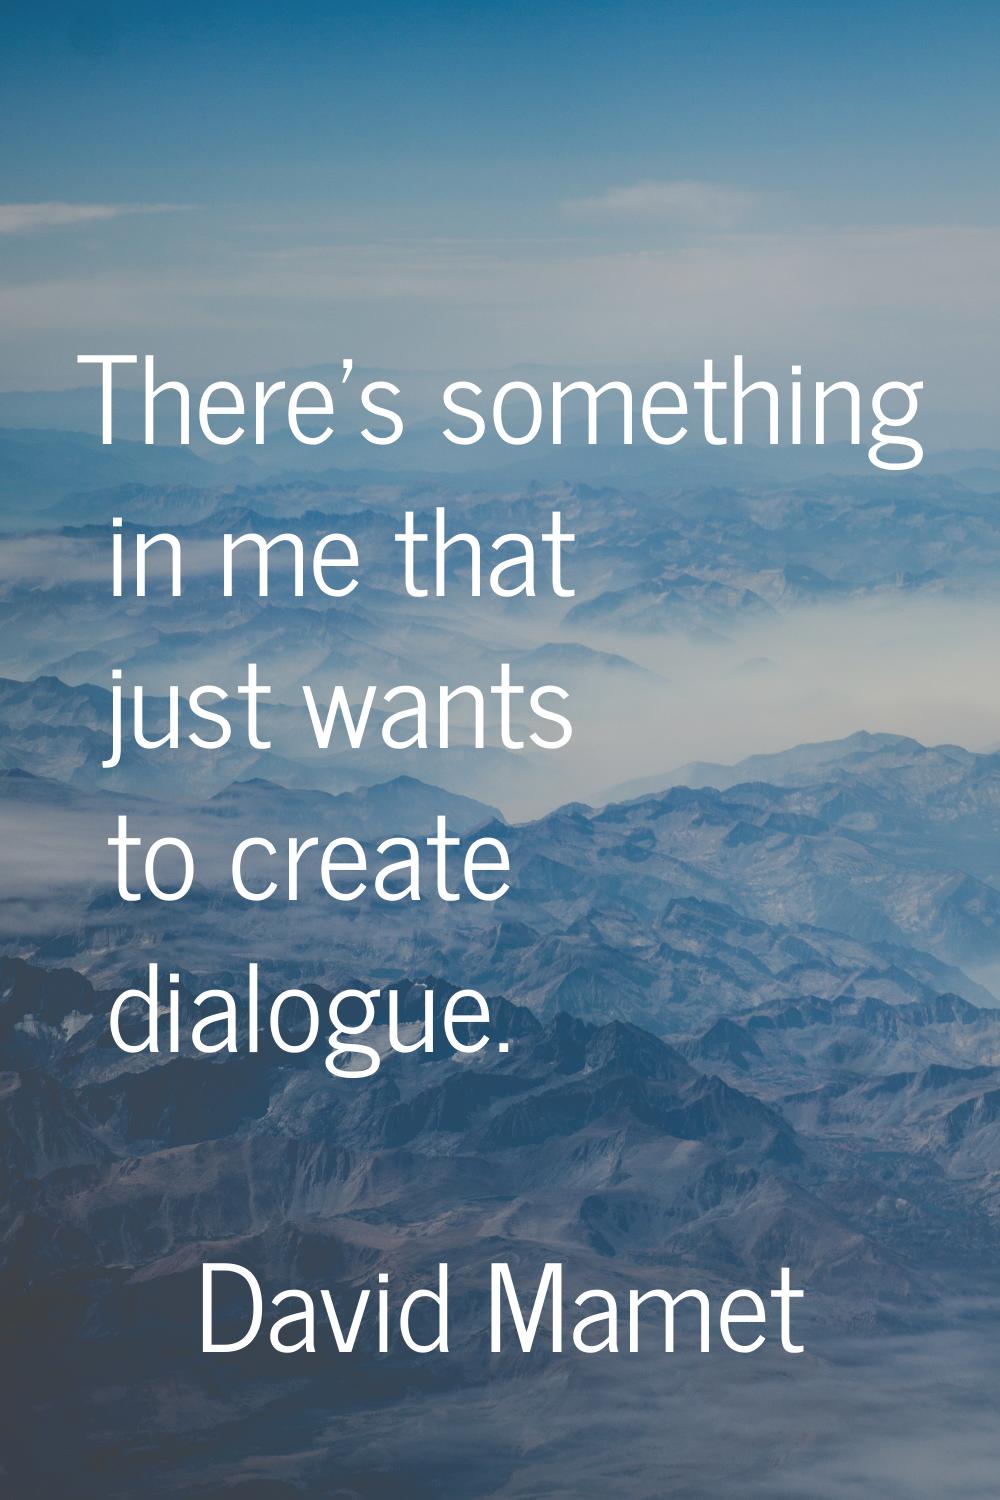 There's something in me that just wants to create dialogue.